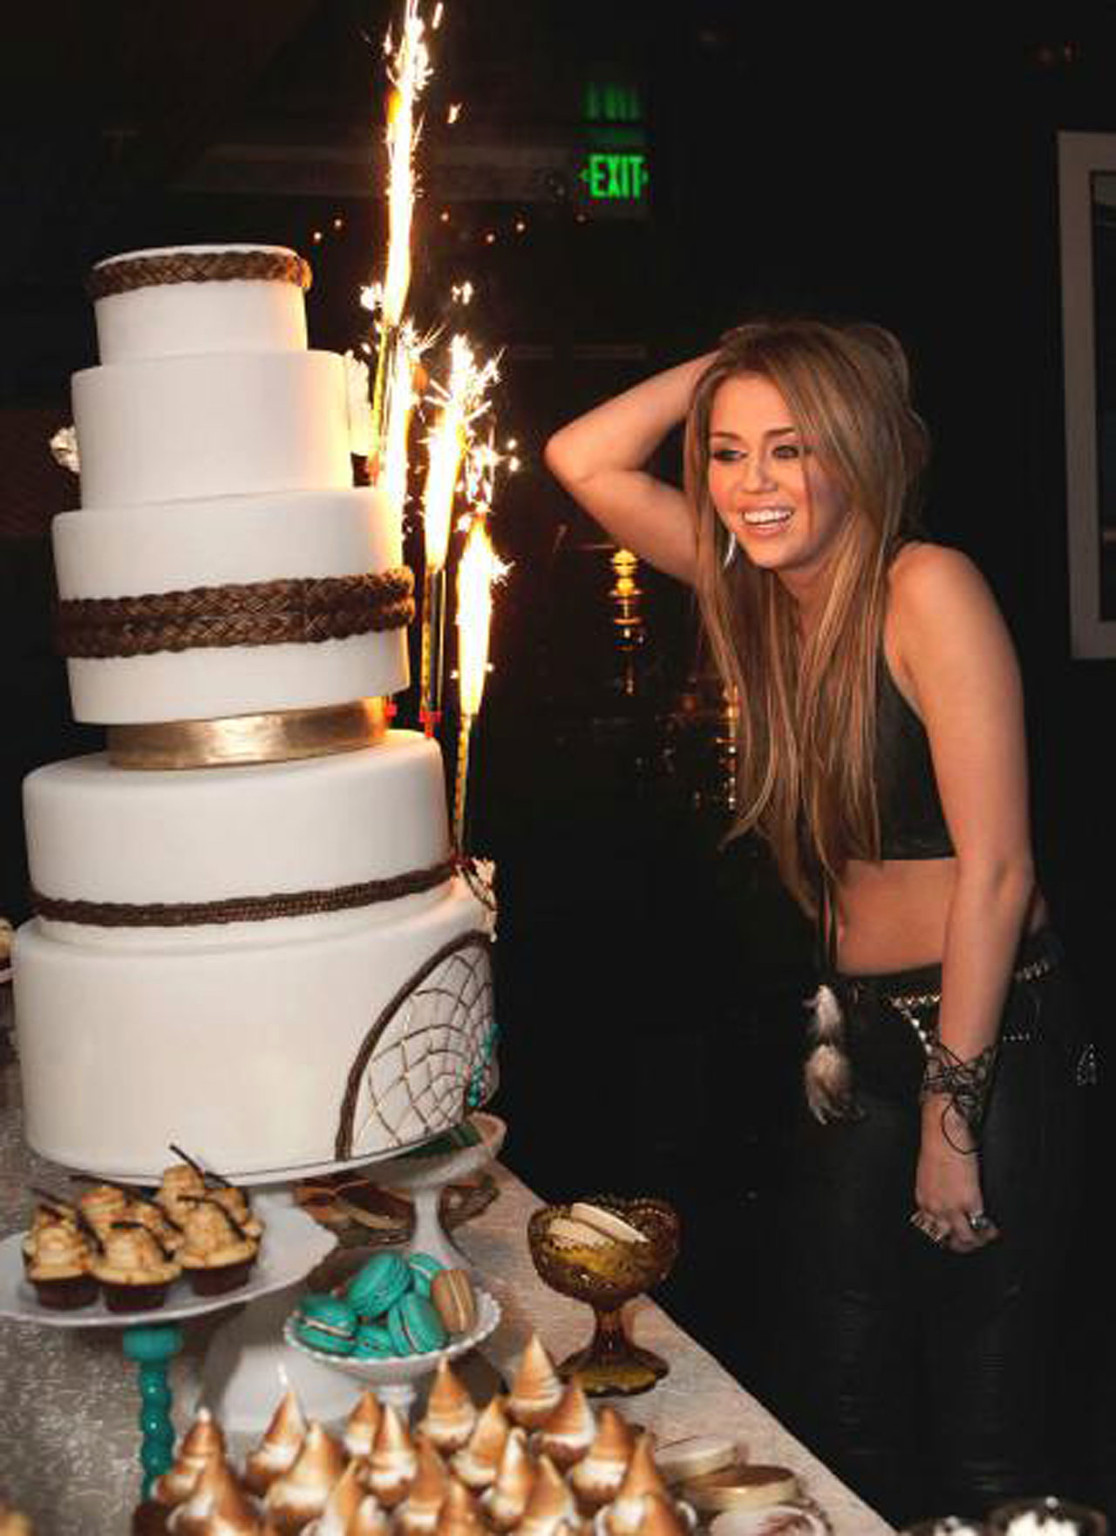 Miley Cyrus young and cute singer celebrated her eighteenth birthday #75325466